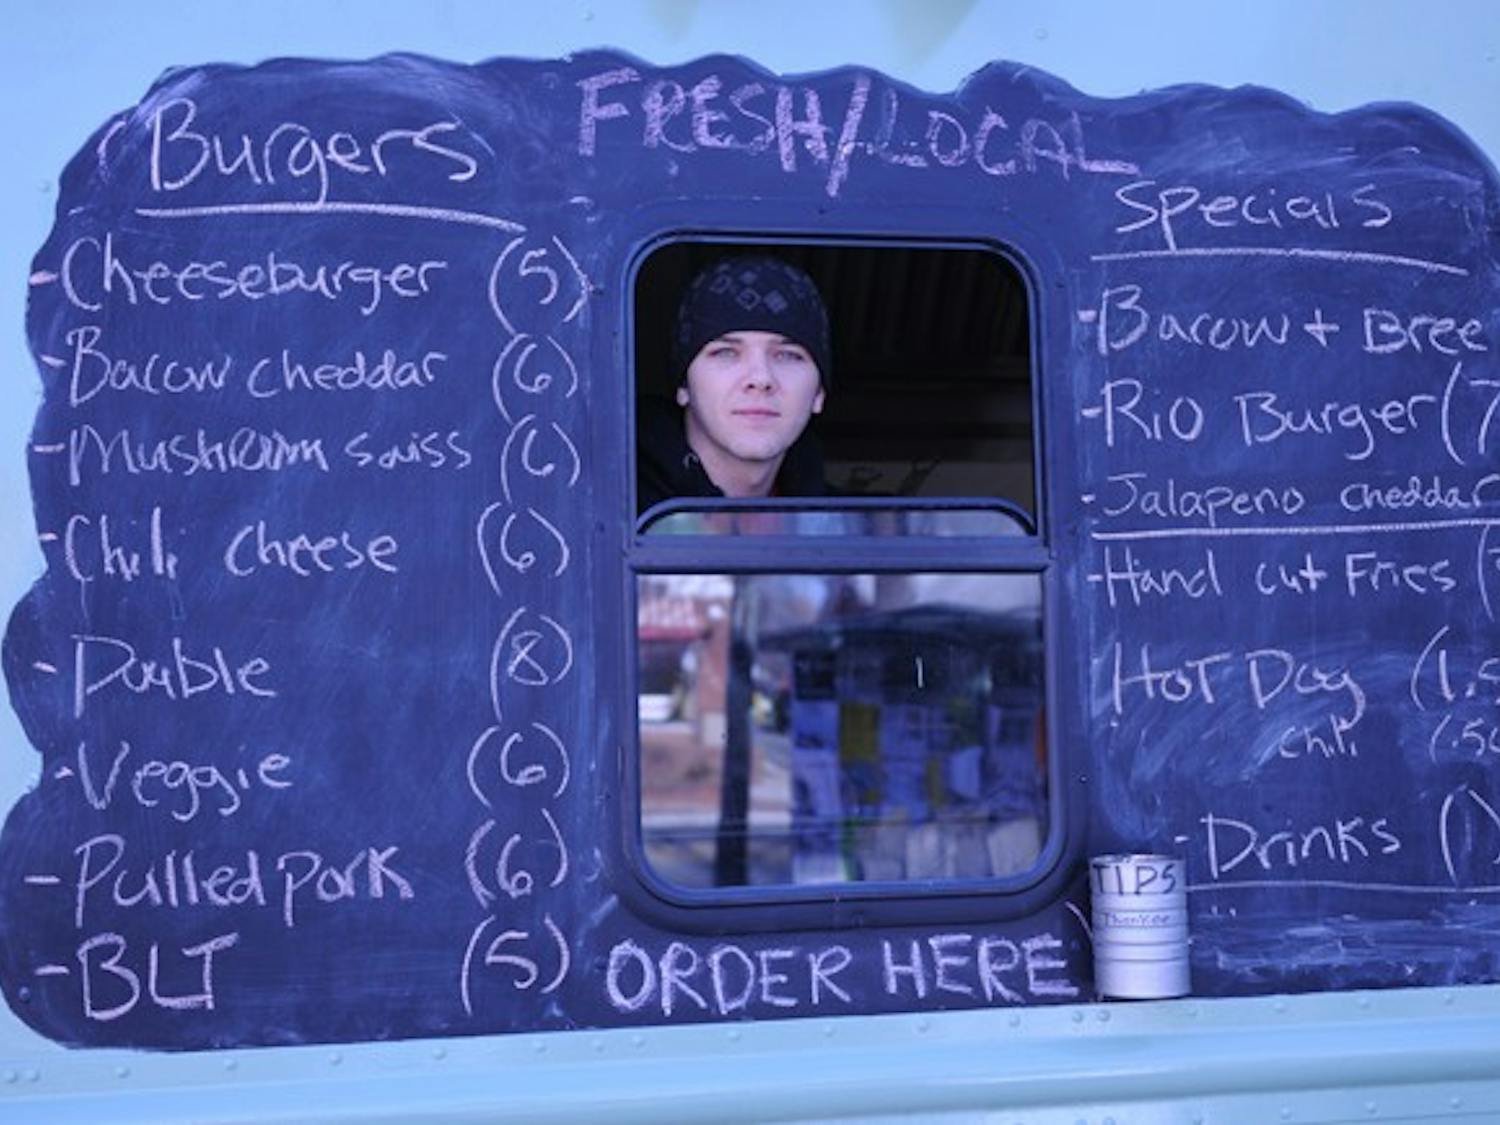 Will and Pop's food truck, owned and operated by Will (pictured) and his father Kenny Pettis, serves home-made lunch options while parked in front of the Dead Mule on Franklin Street.  